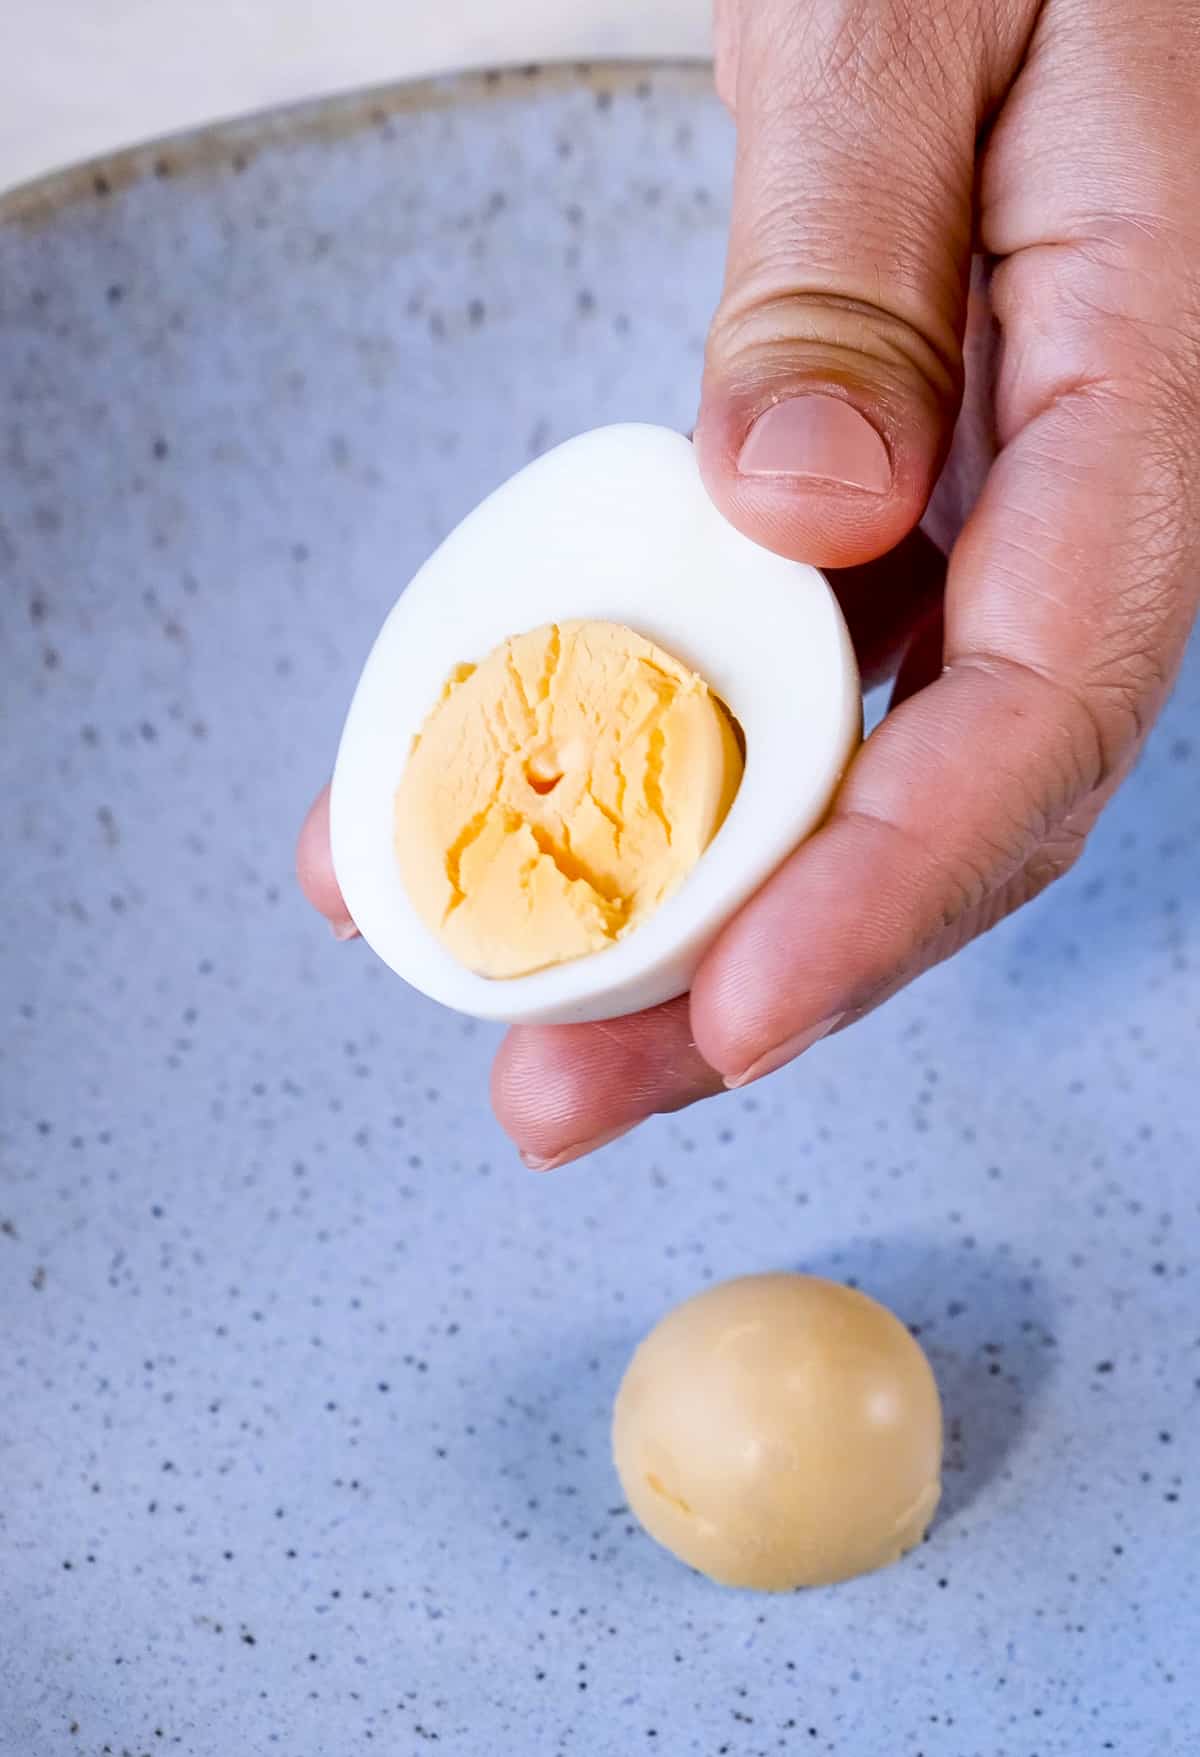 Hand gently squeezing half of a hard boiled egg to loosen the yolk.